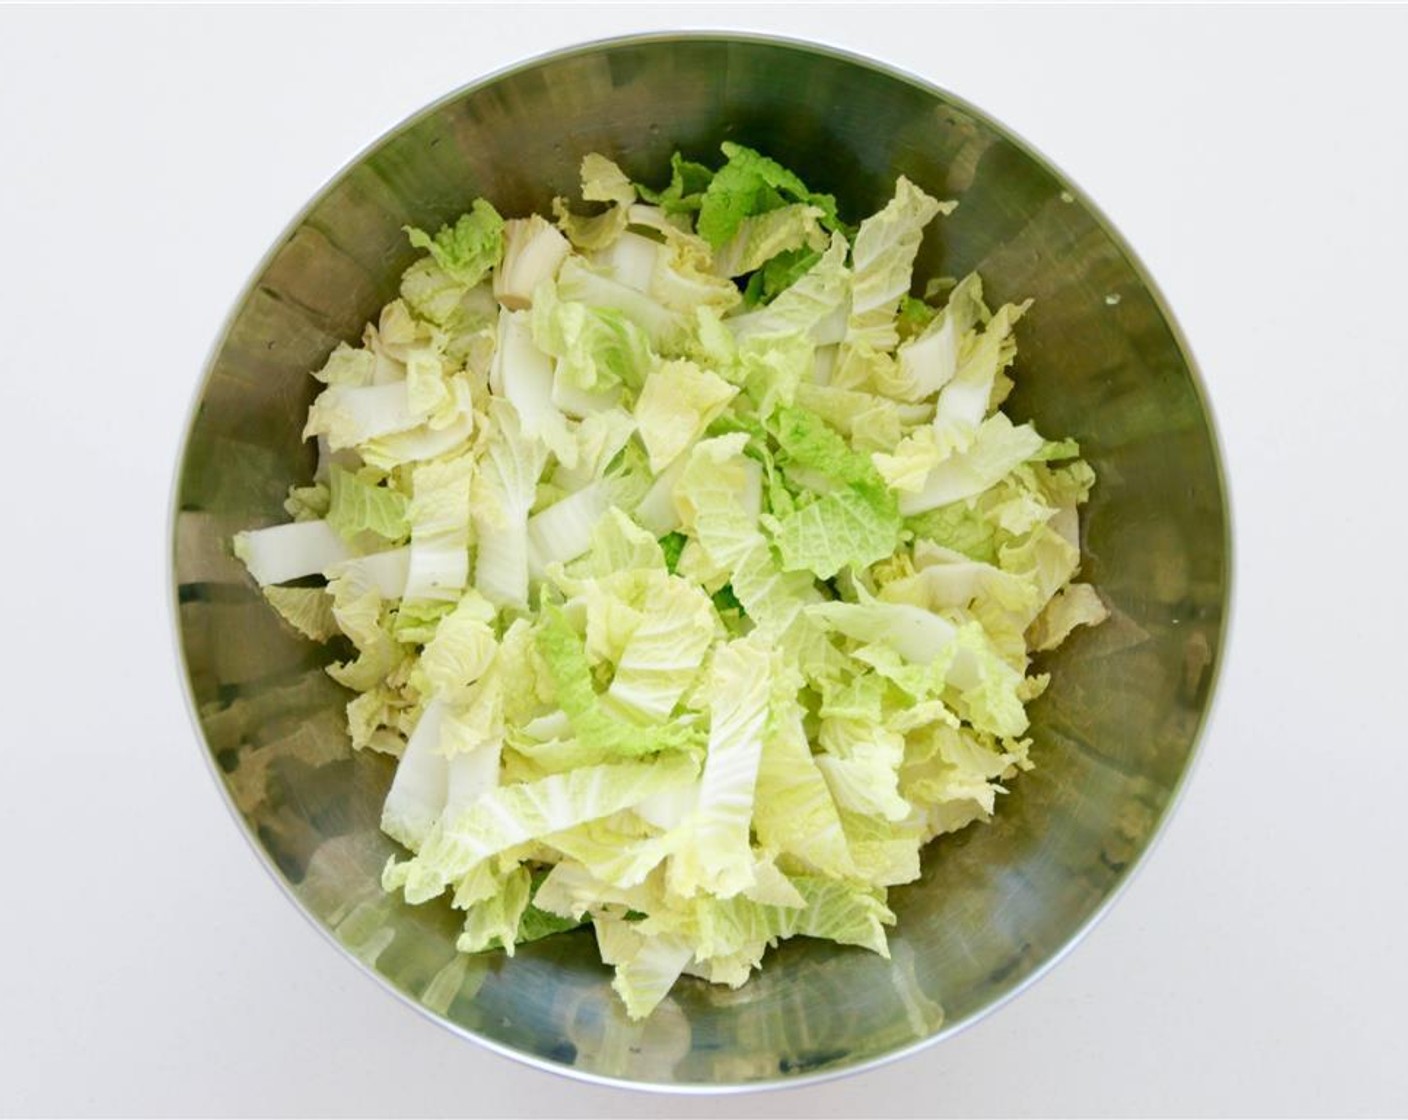 step 2 Wash, dry the Napa Cabbage (5 cups), then slice into 1 inch pieces.